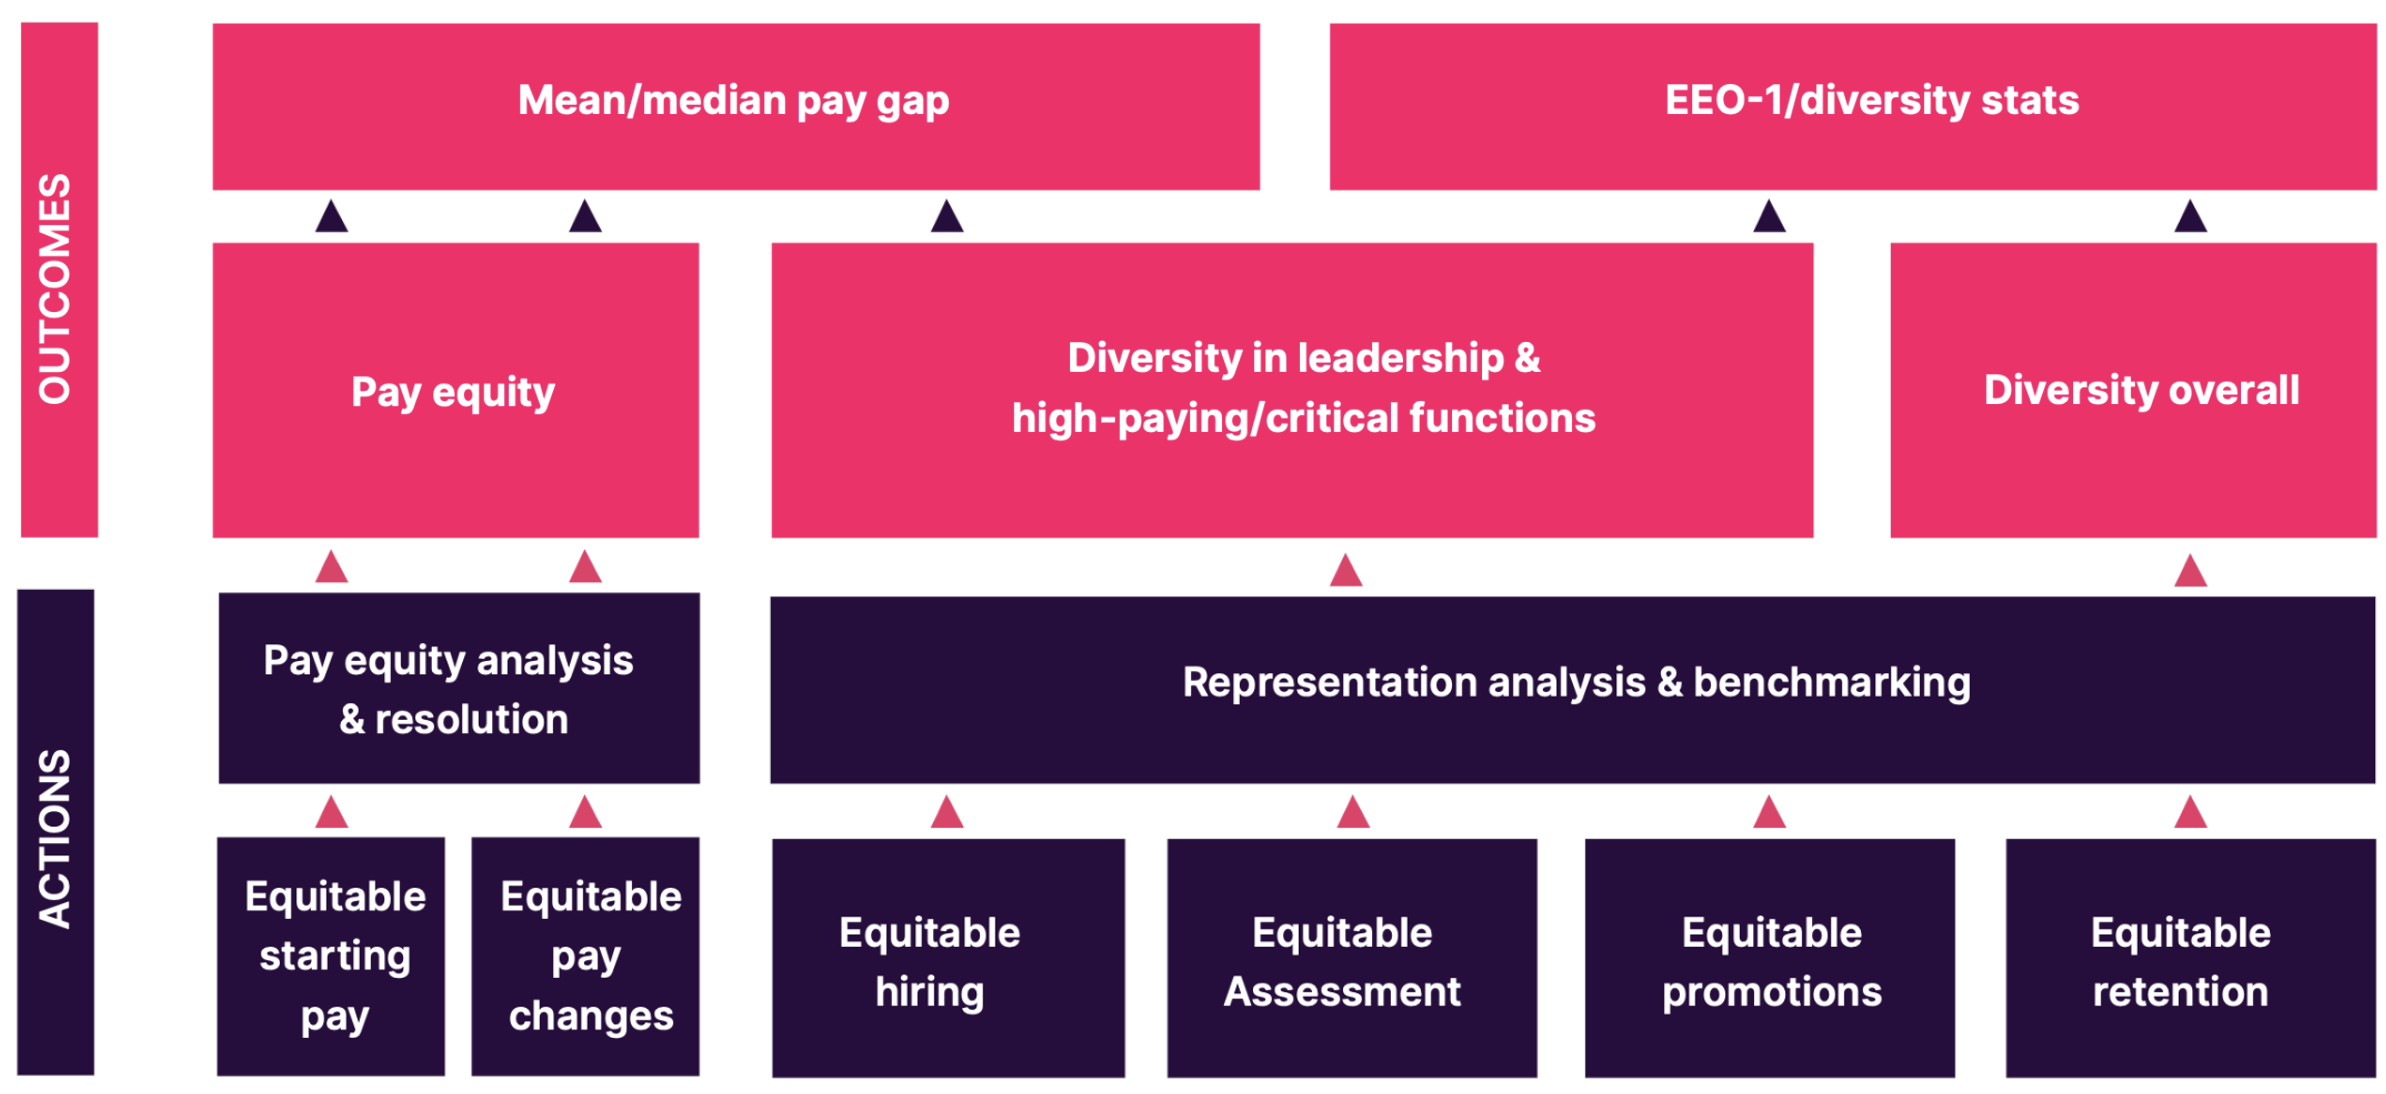 ESG reporting software - diagram showing how equitable actions adder up to measurable outcomes